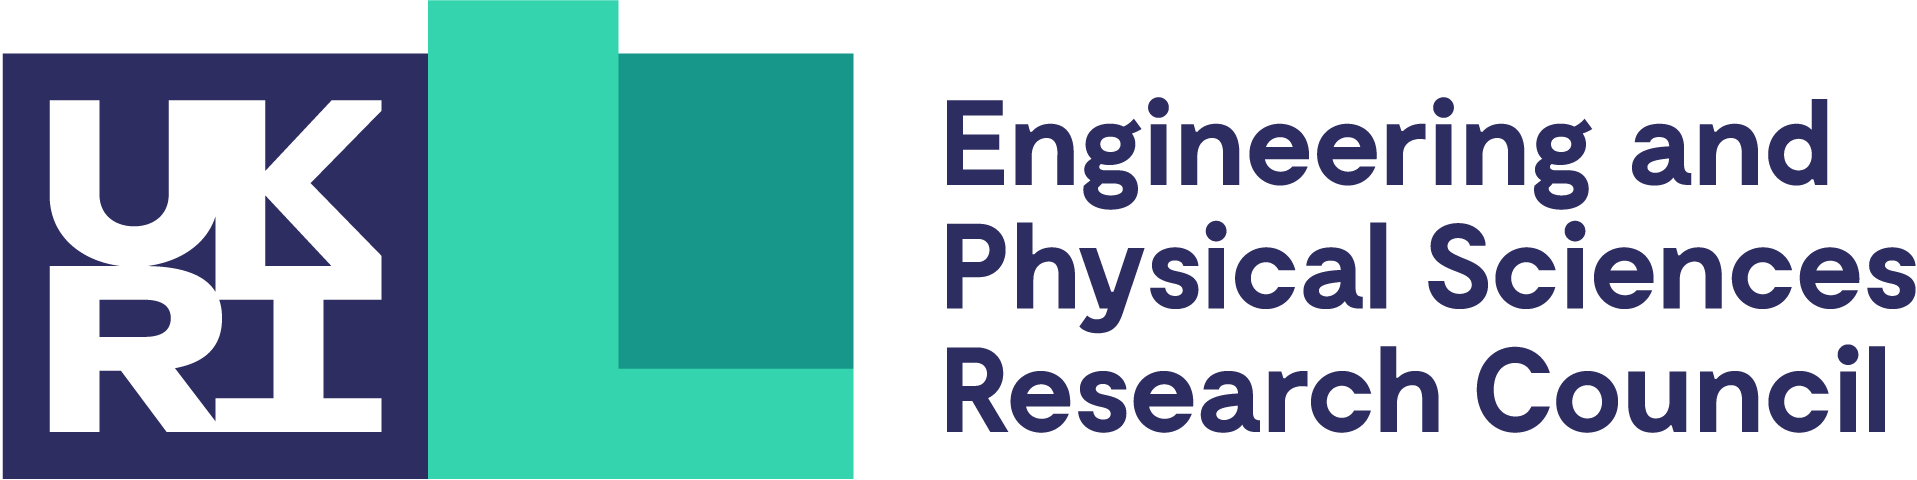 Engineering and Physical Sciences Research Council (EPSRC) logo, select to go to the website. 